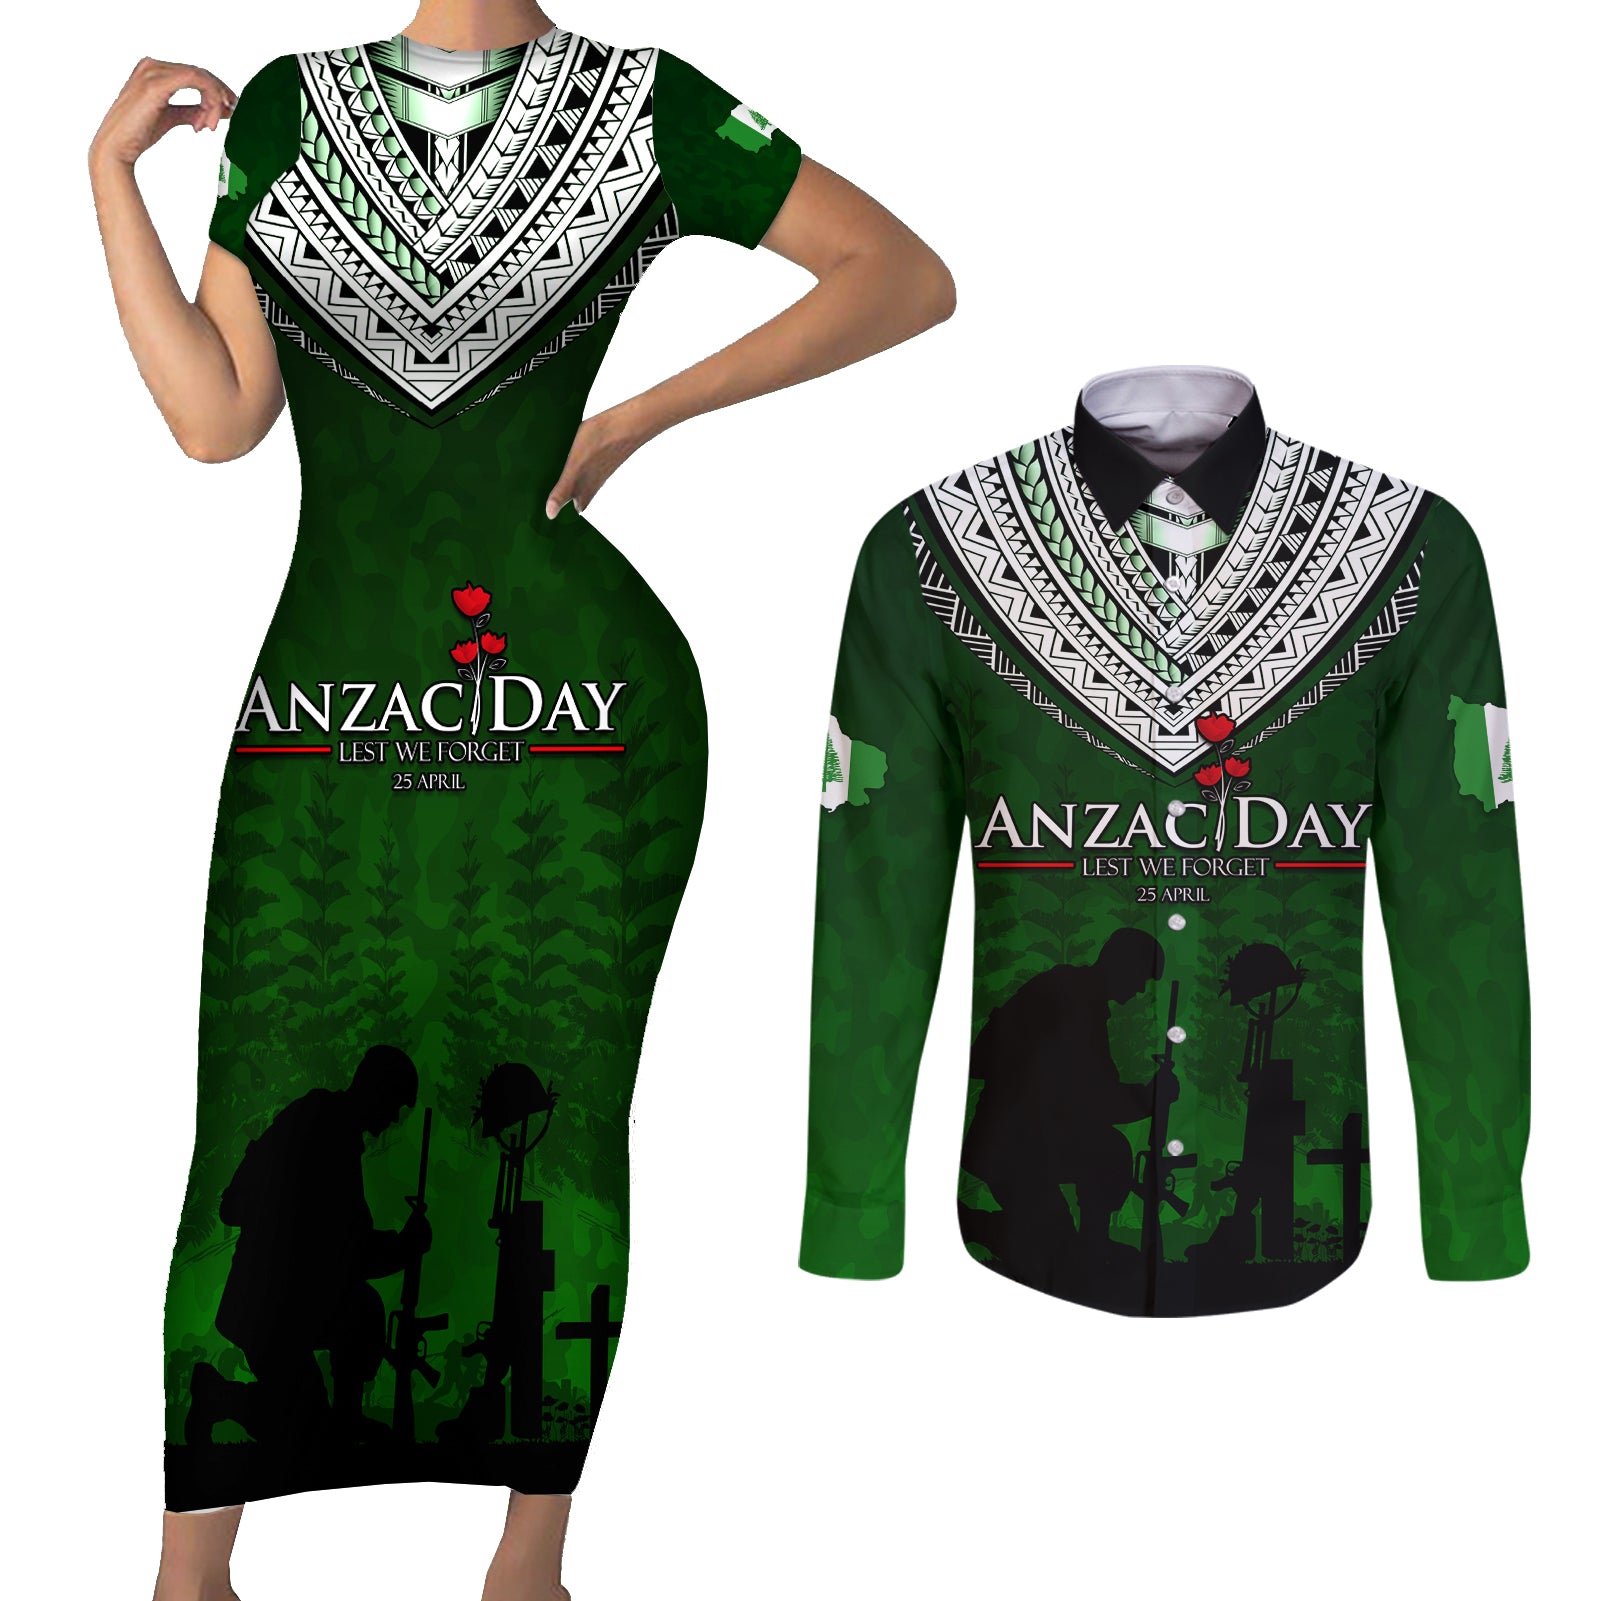 Norfolk Island ANZAC Day Couples Matching Short Sleeve Bodycon Dress and Long Sleeve Button Shirt Soldier Lest We Forget Camouflage LT03 Green - Polynesian Pride